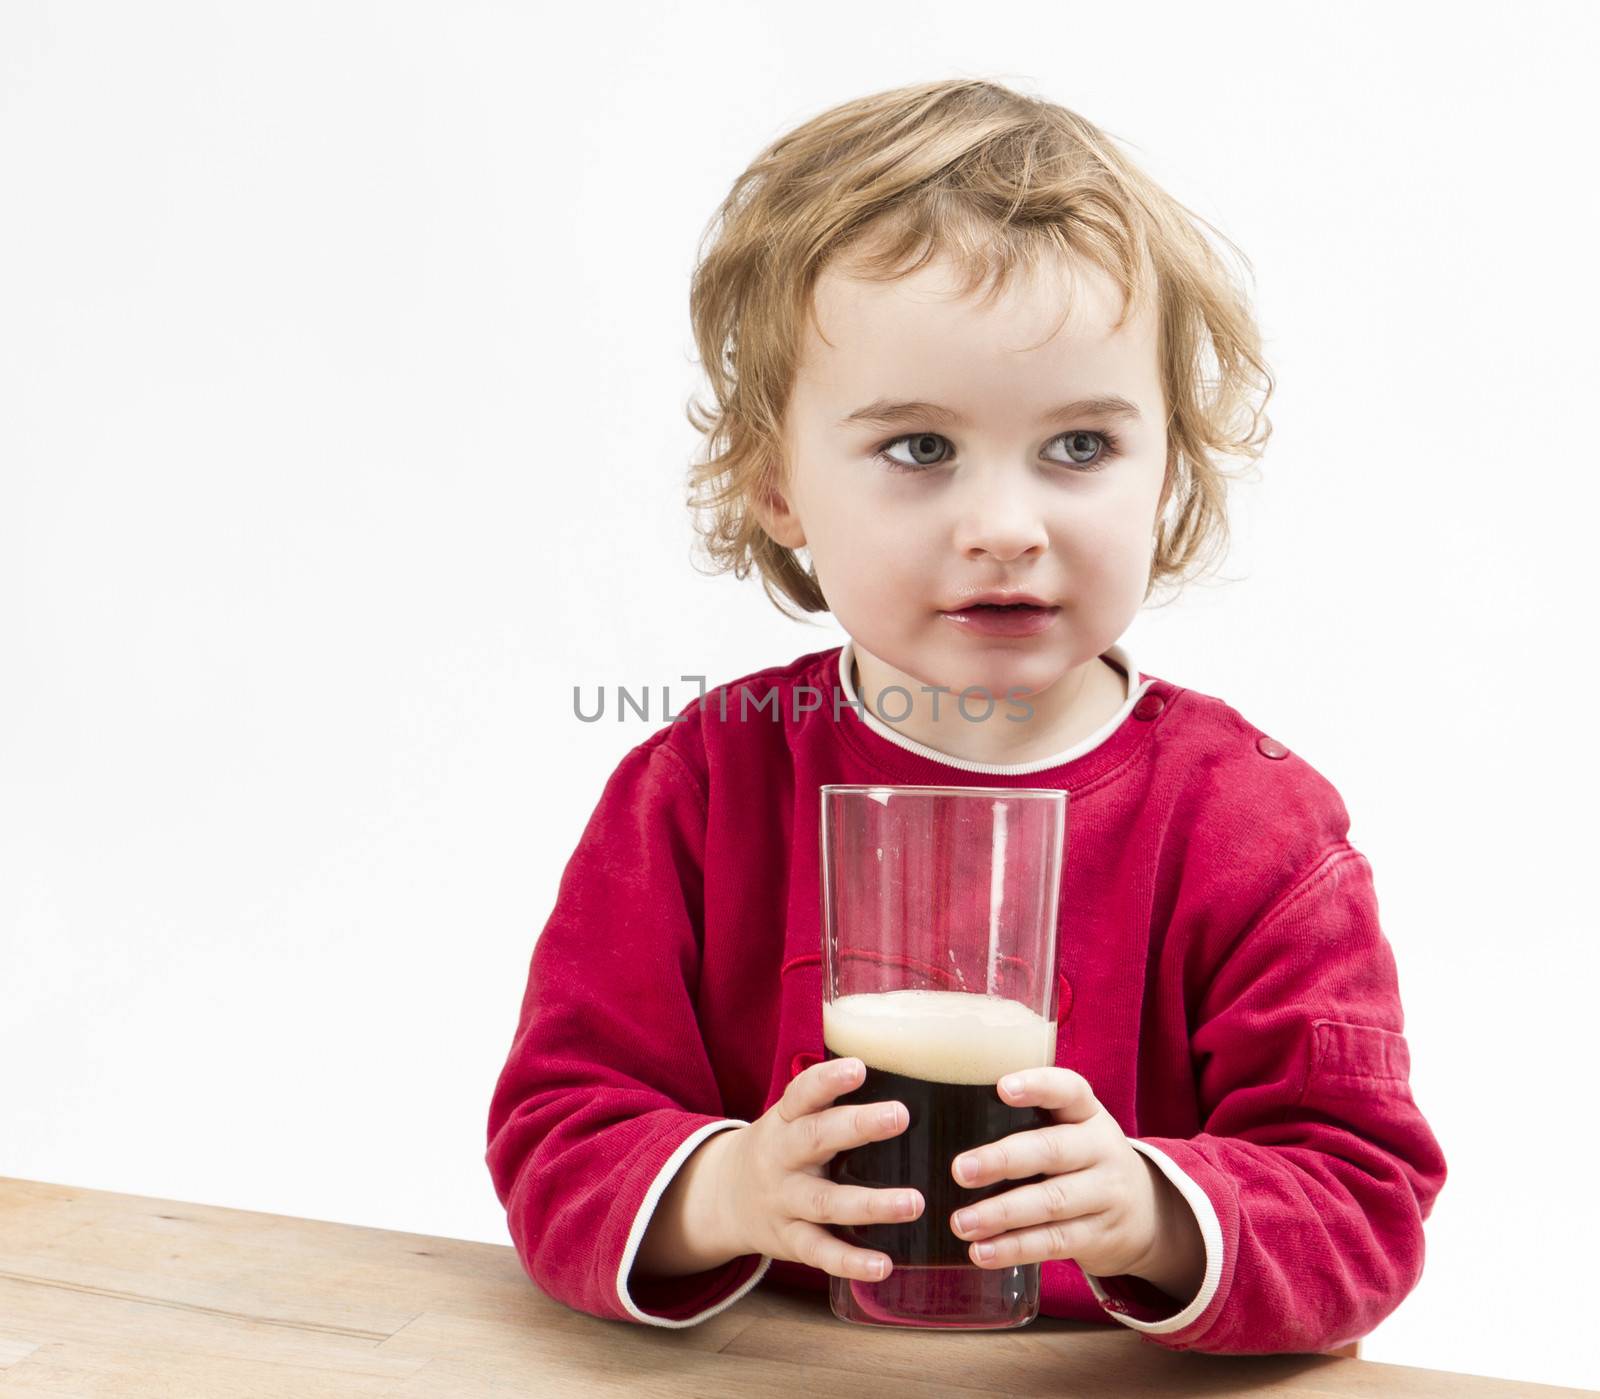 young girl drinking beer in light background. studio shot